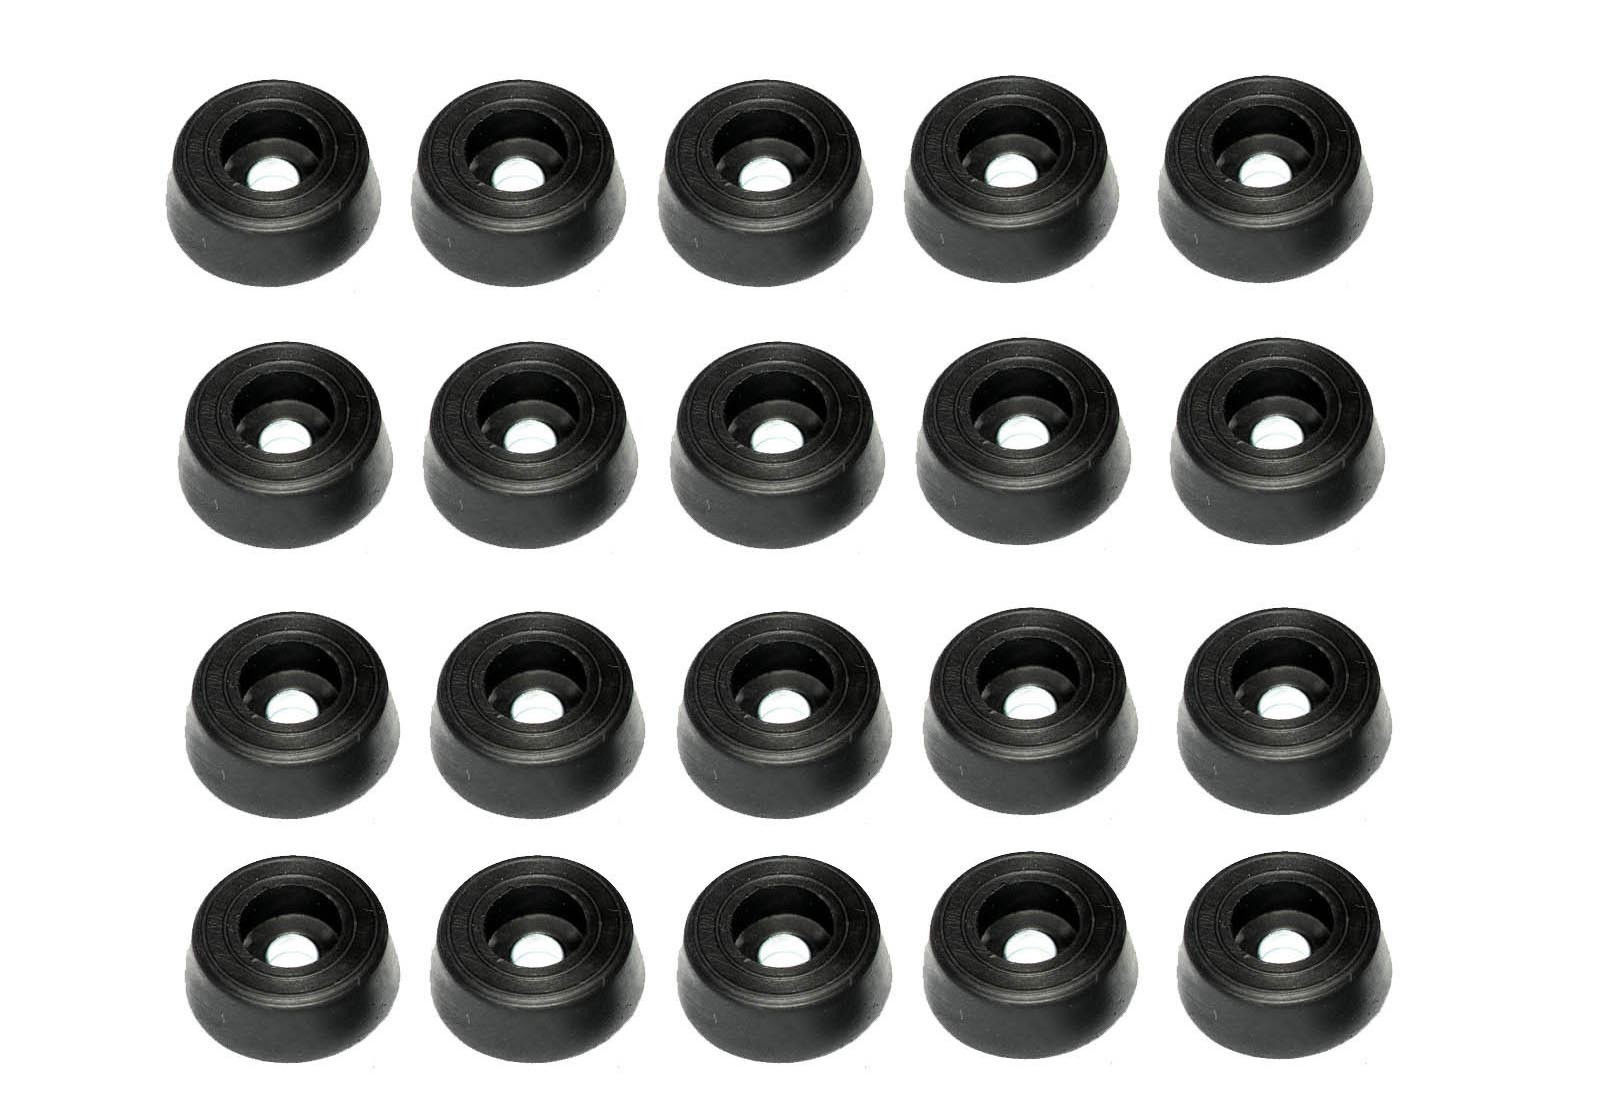 20 Medium Round Rubber Feet -  .312 H x .859 D - Great for Cutting Boards, Small Electronics, Crafts.  Food Safe / RoHS Compliant / Prop 65 Free